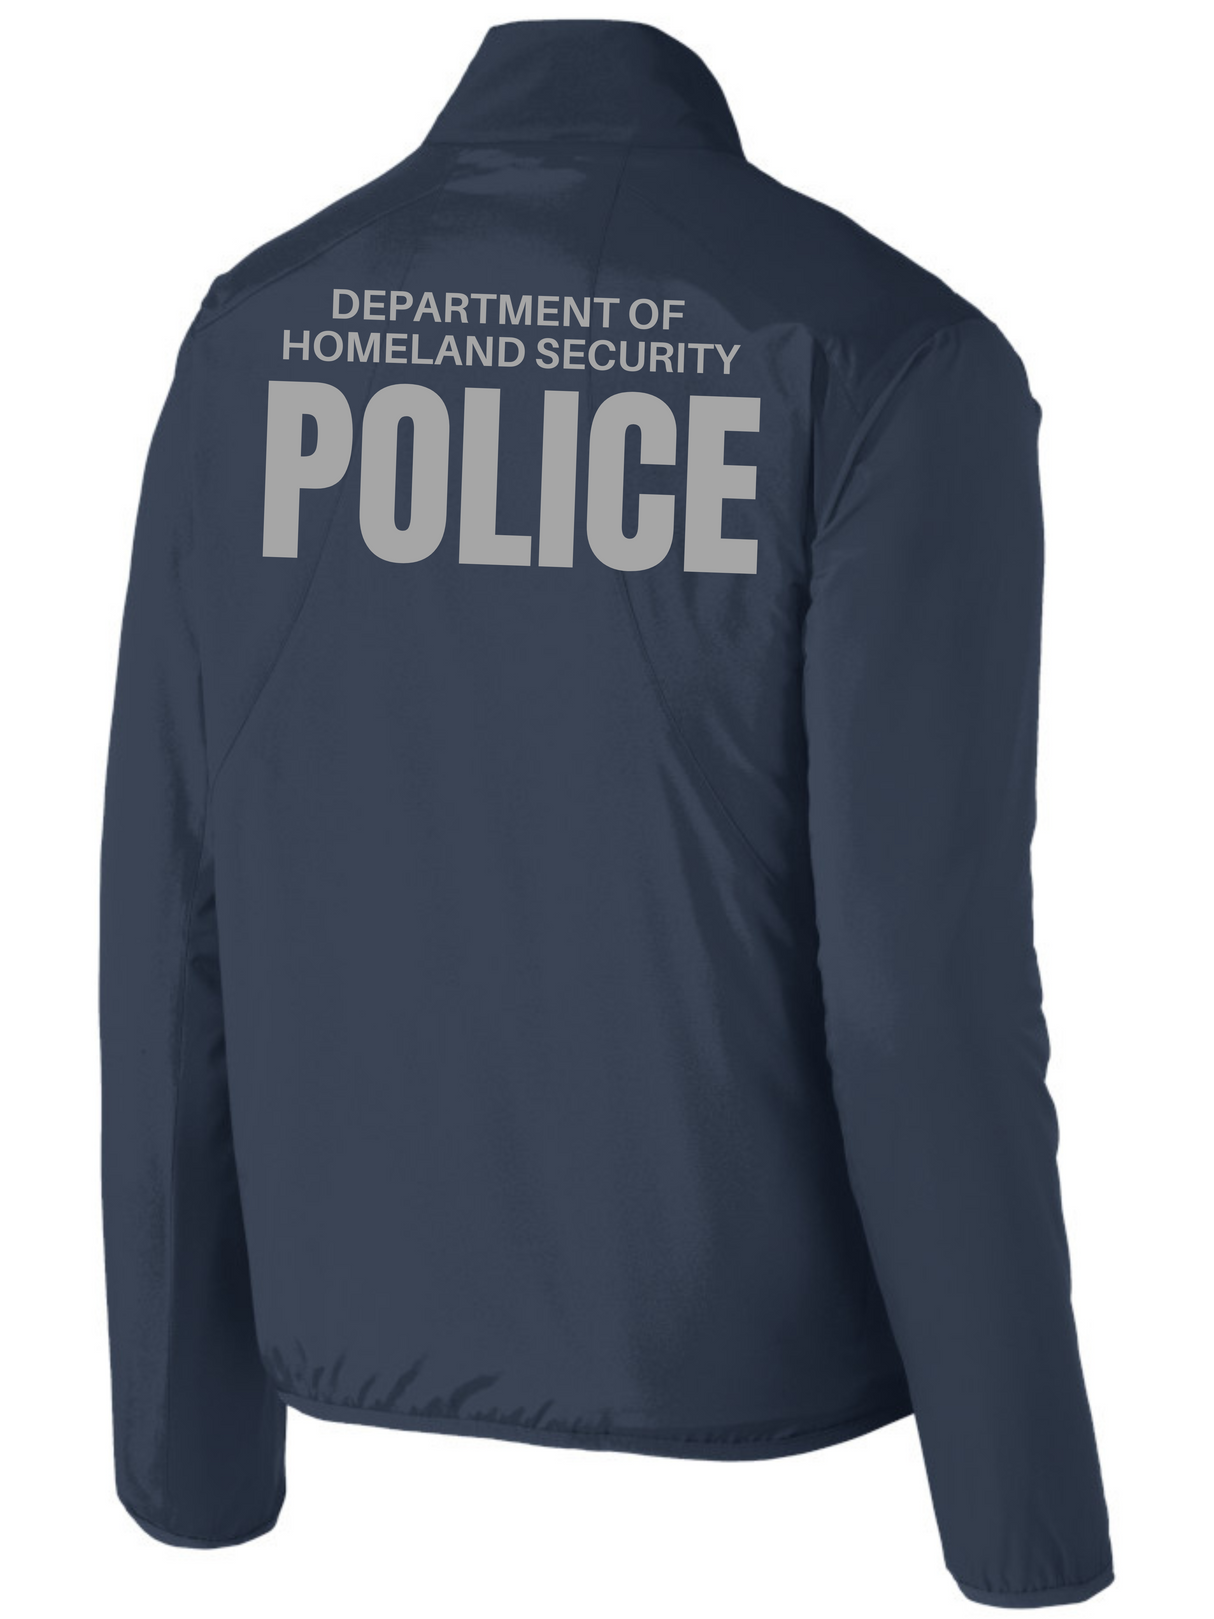 SUBDUED DHS POLICE Agency Identifier Jacket - FEDS Apparel